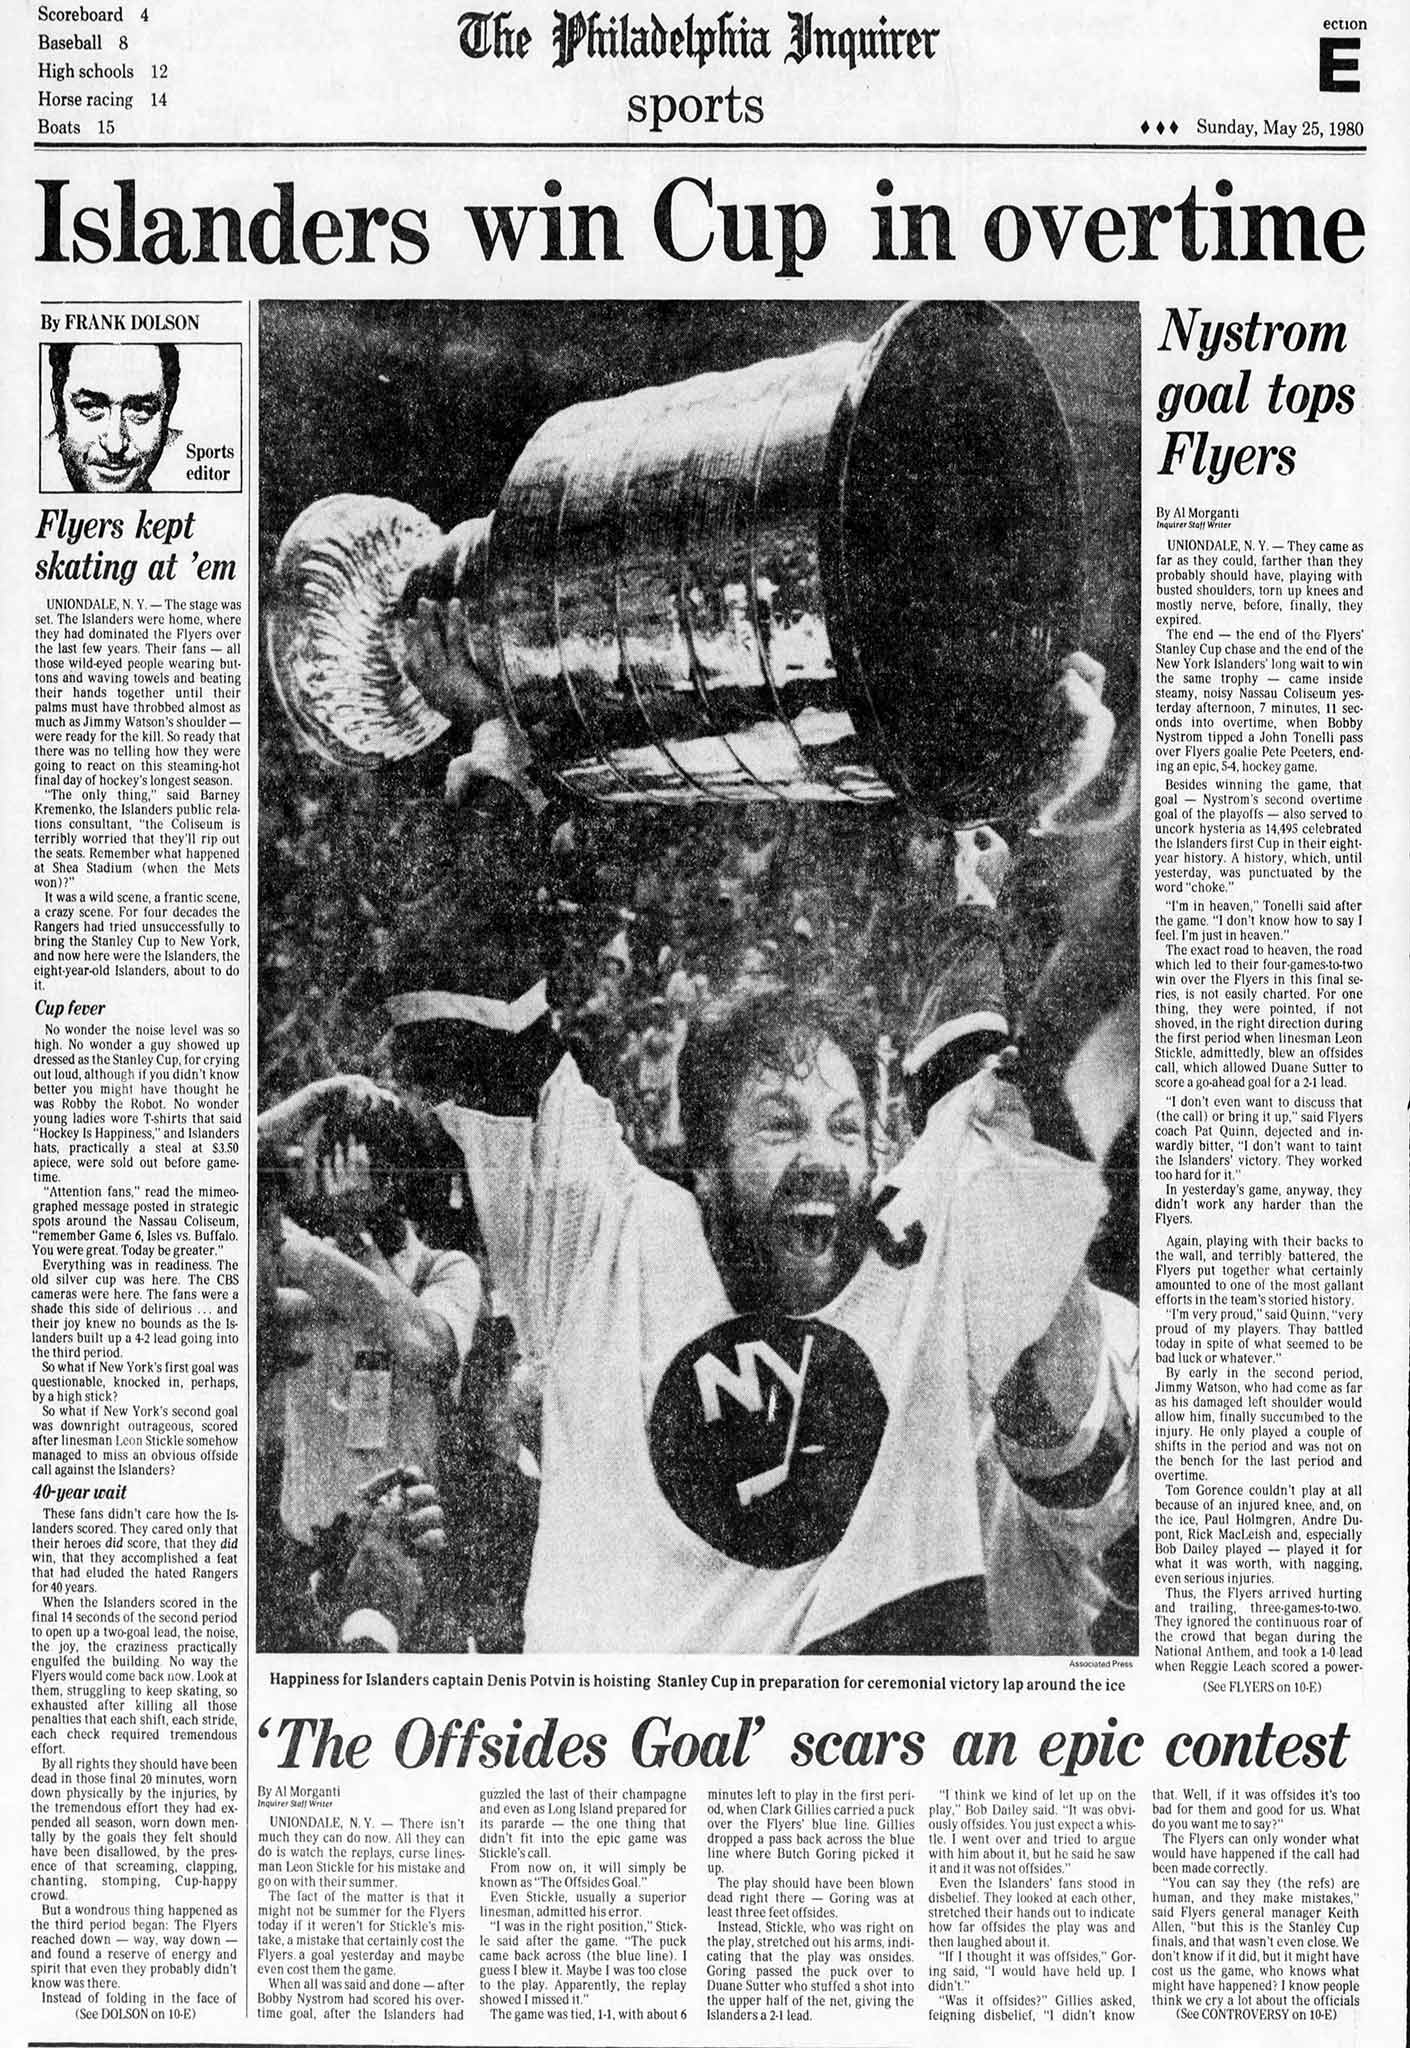 Remembering the Philadelphia Flyers' 1st Stanley Cup 40 Years